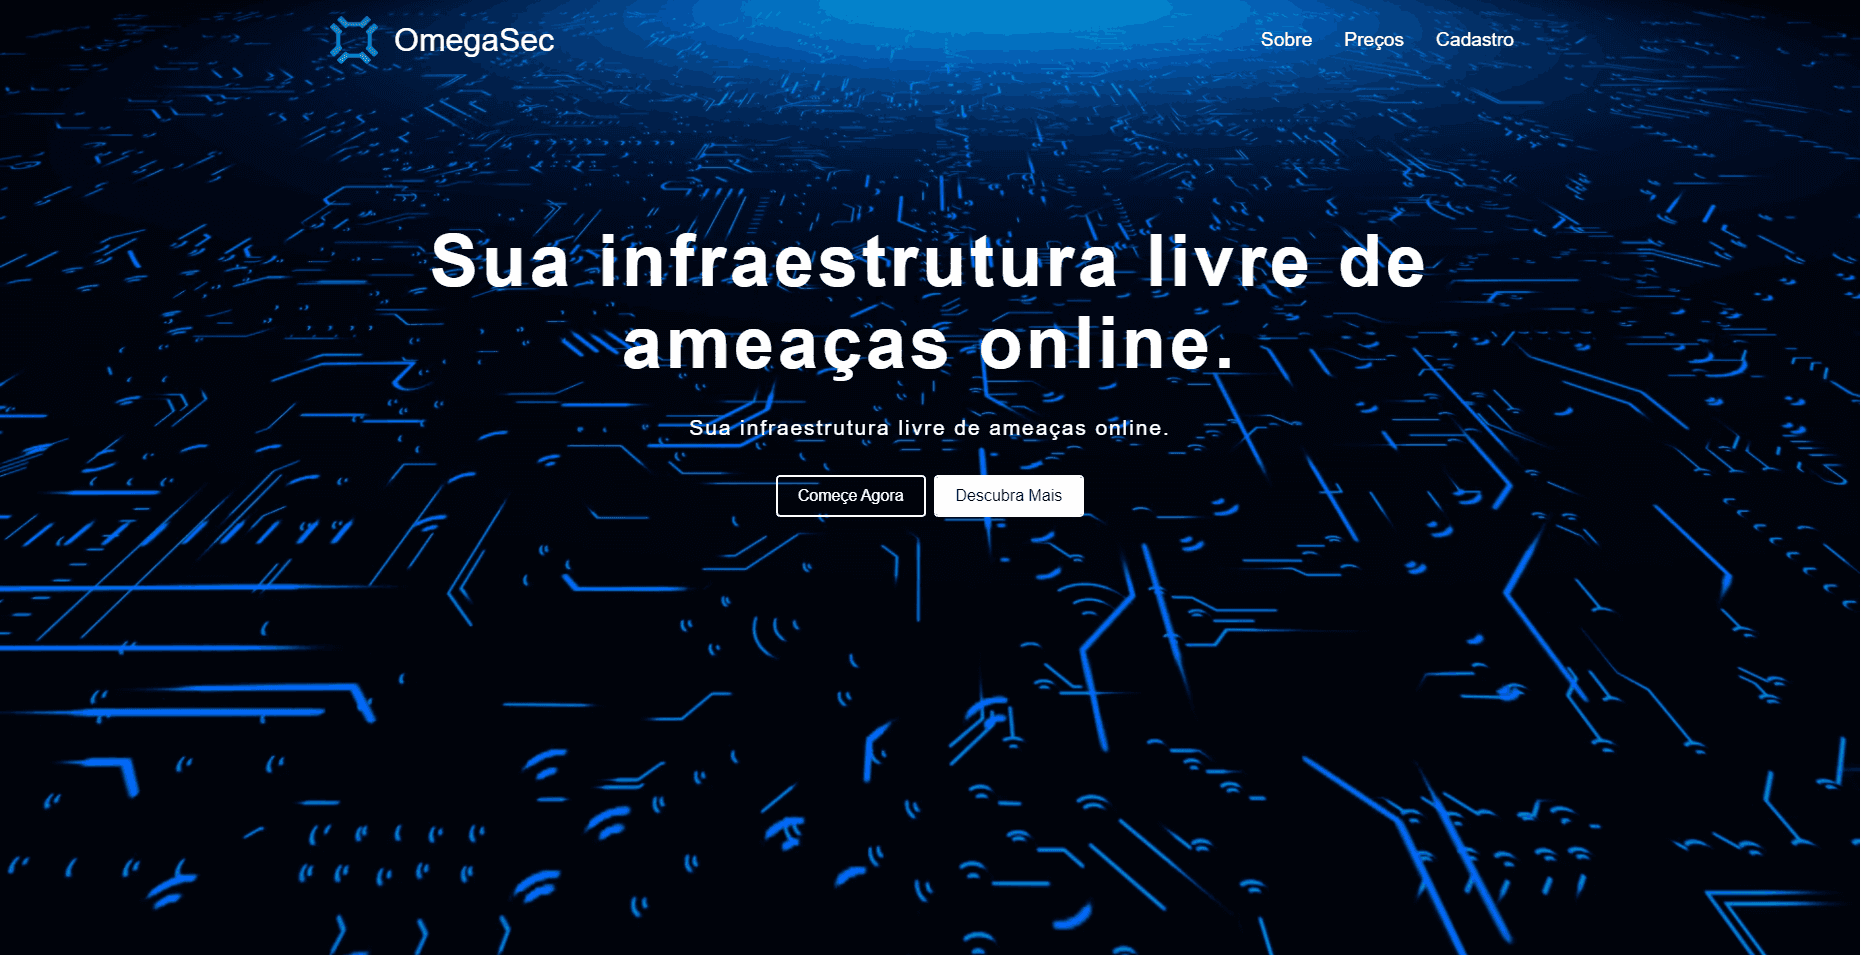 OmegaSec - A landing page for a security infra company!